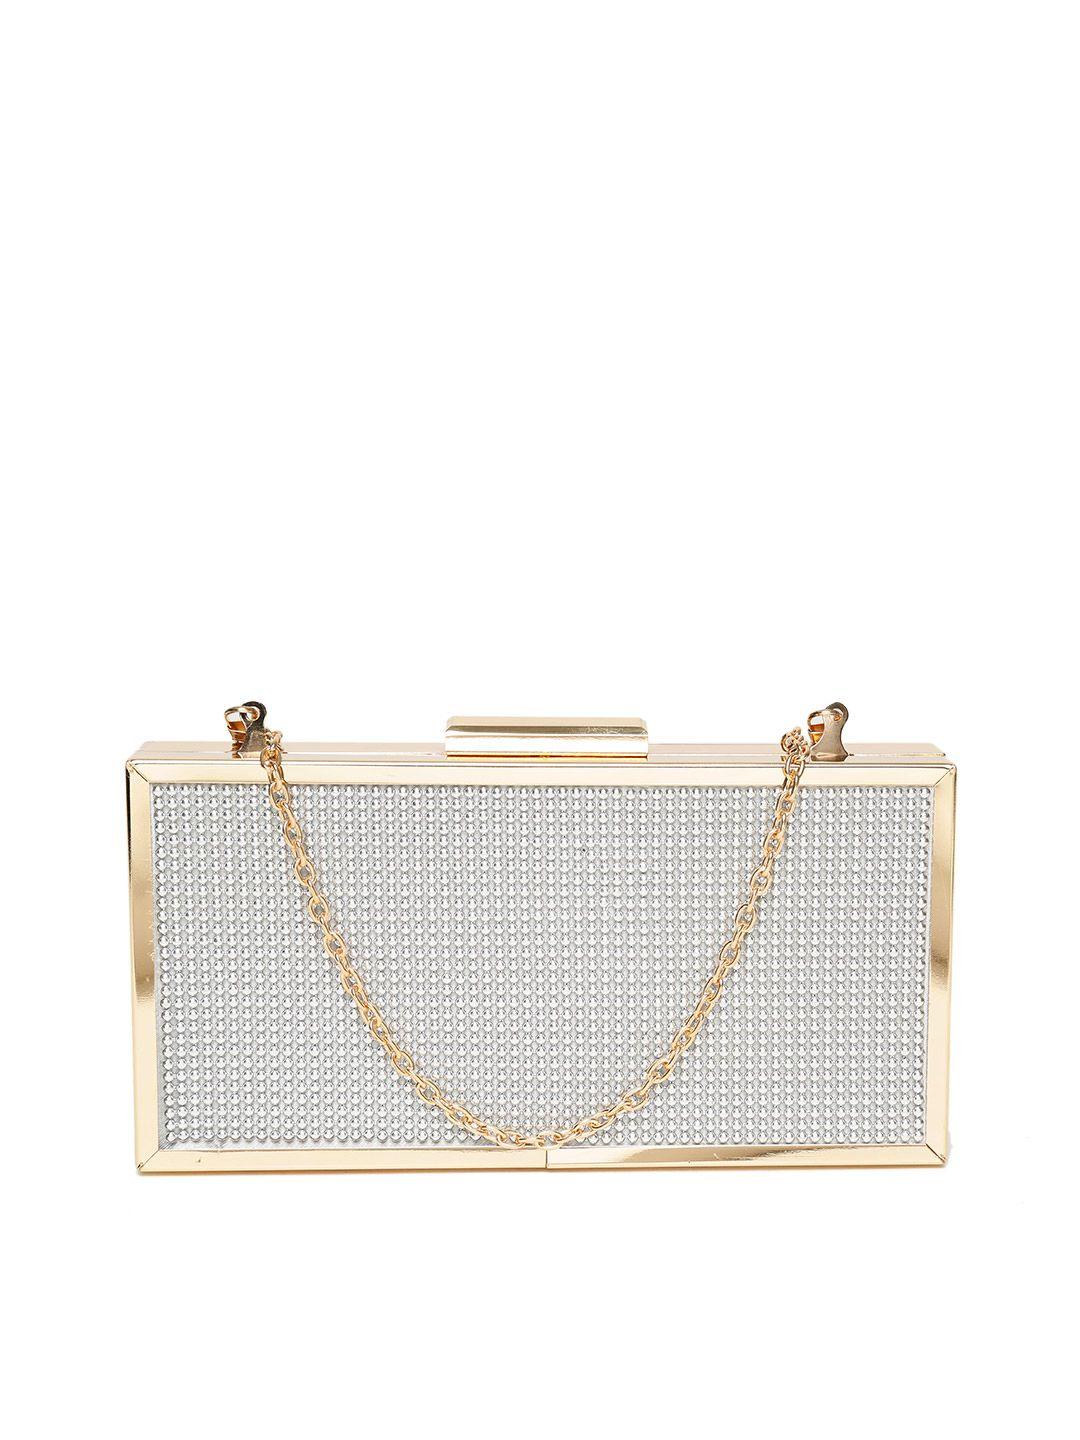 giordano silver-toned textured box clutch with chain strap